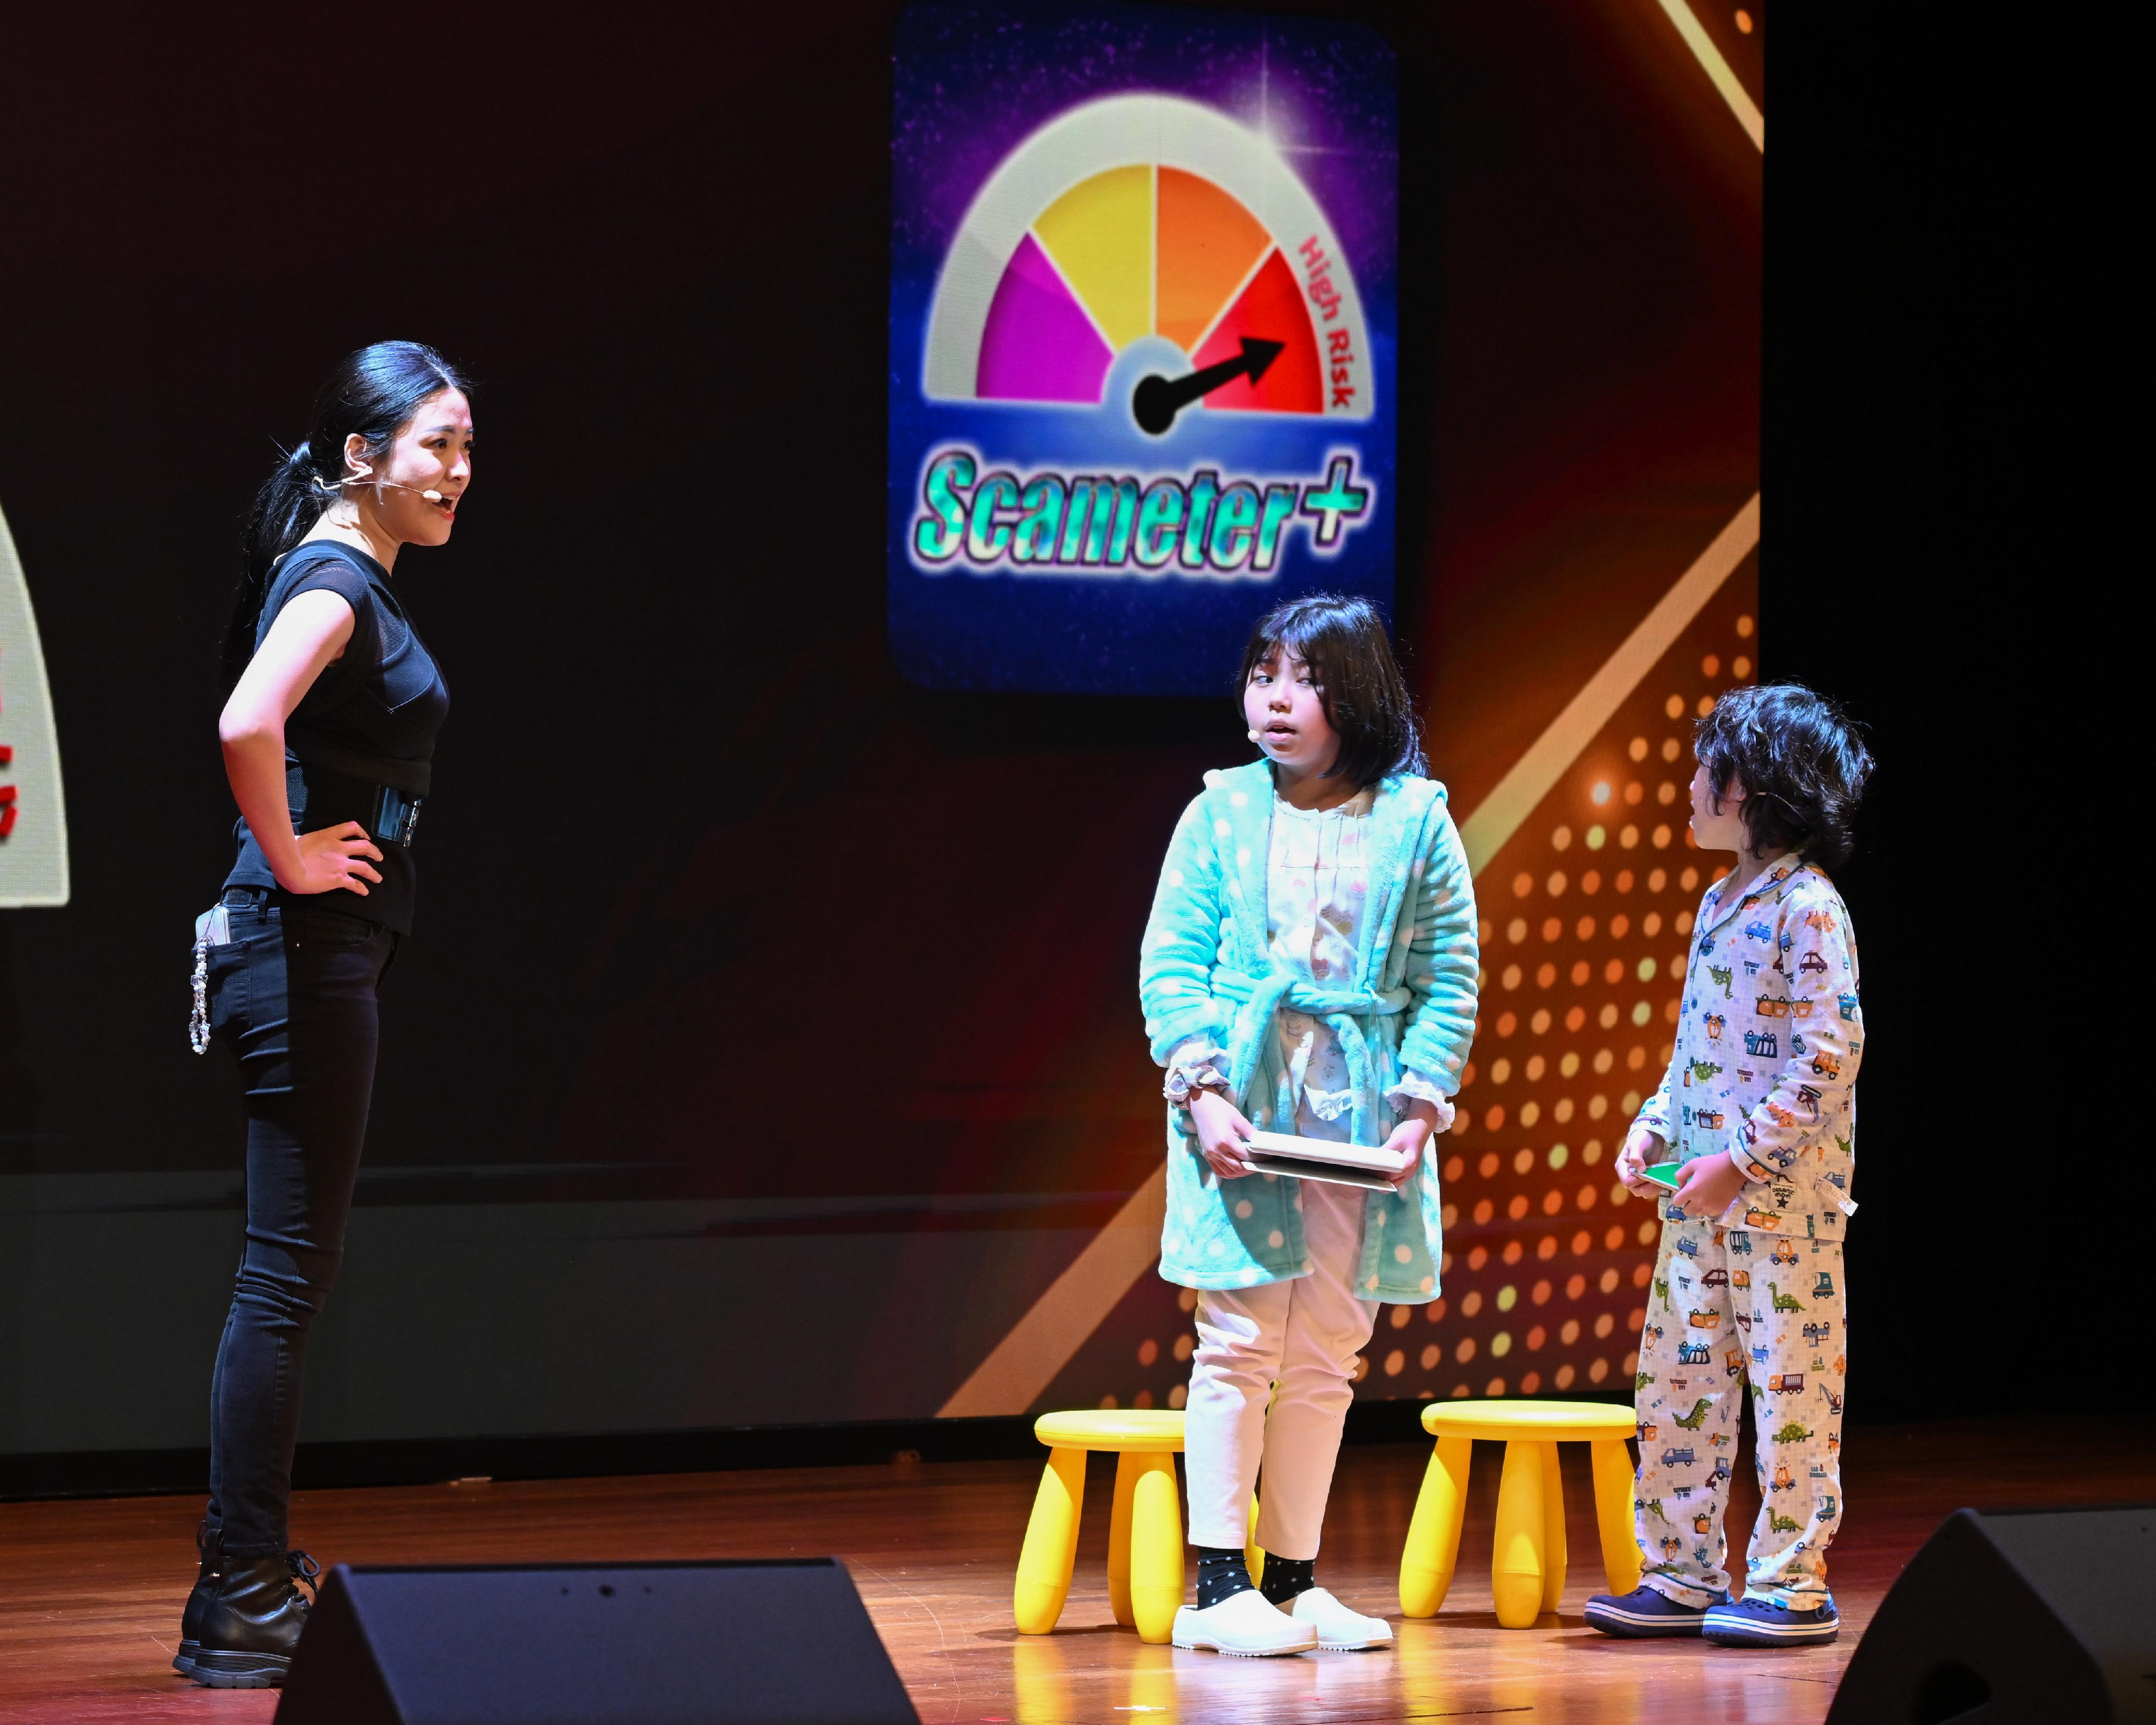 The Good Citizen Award Presentation Ceremony 2023 was held today (March 17). Photo shows a drama performance to promote the upgraded version of the mobile application “Scameter+”.